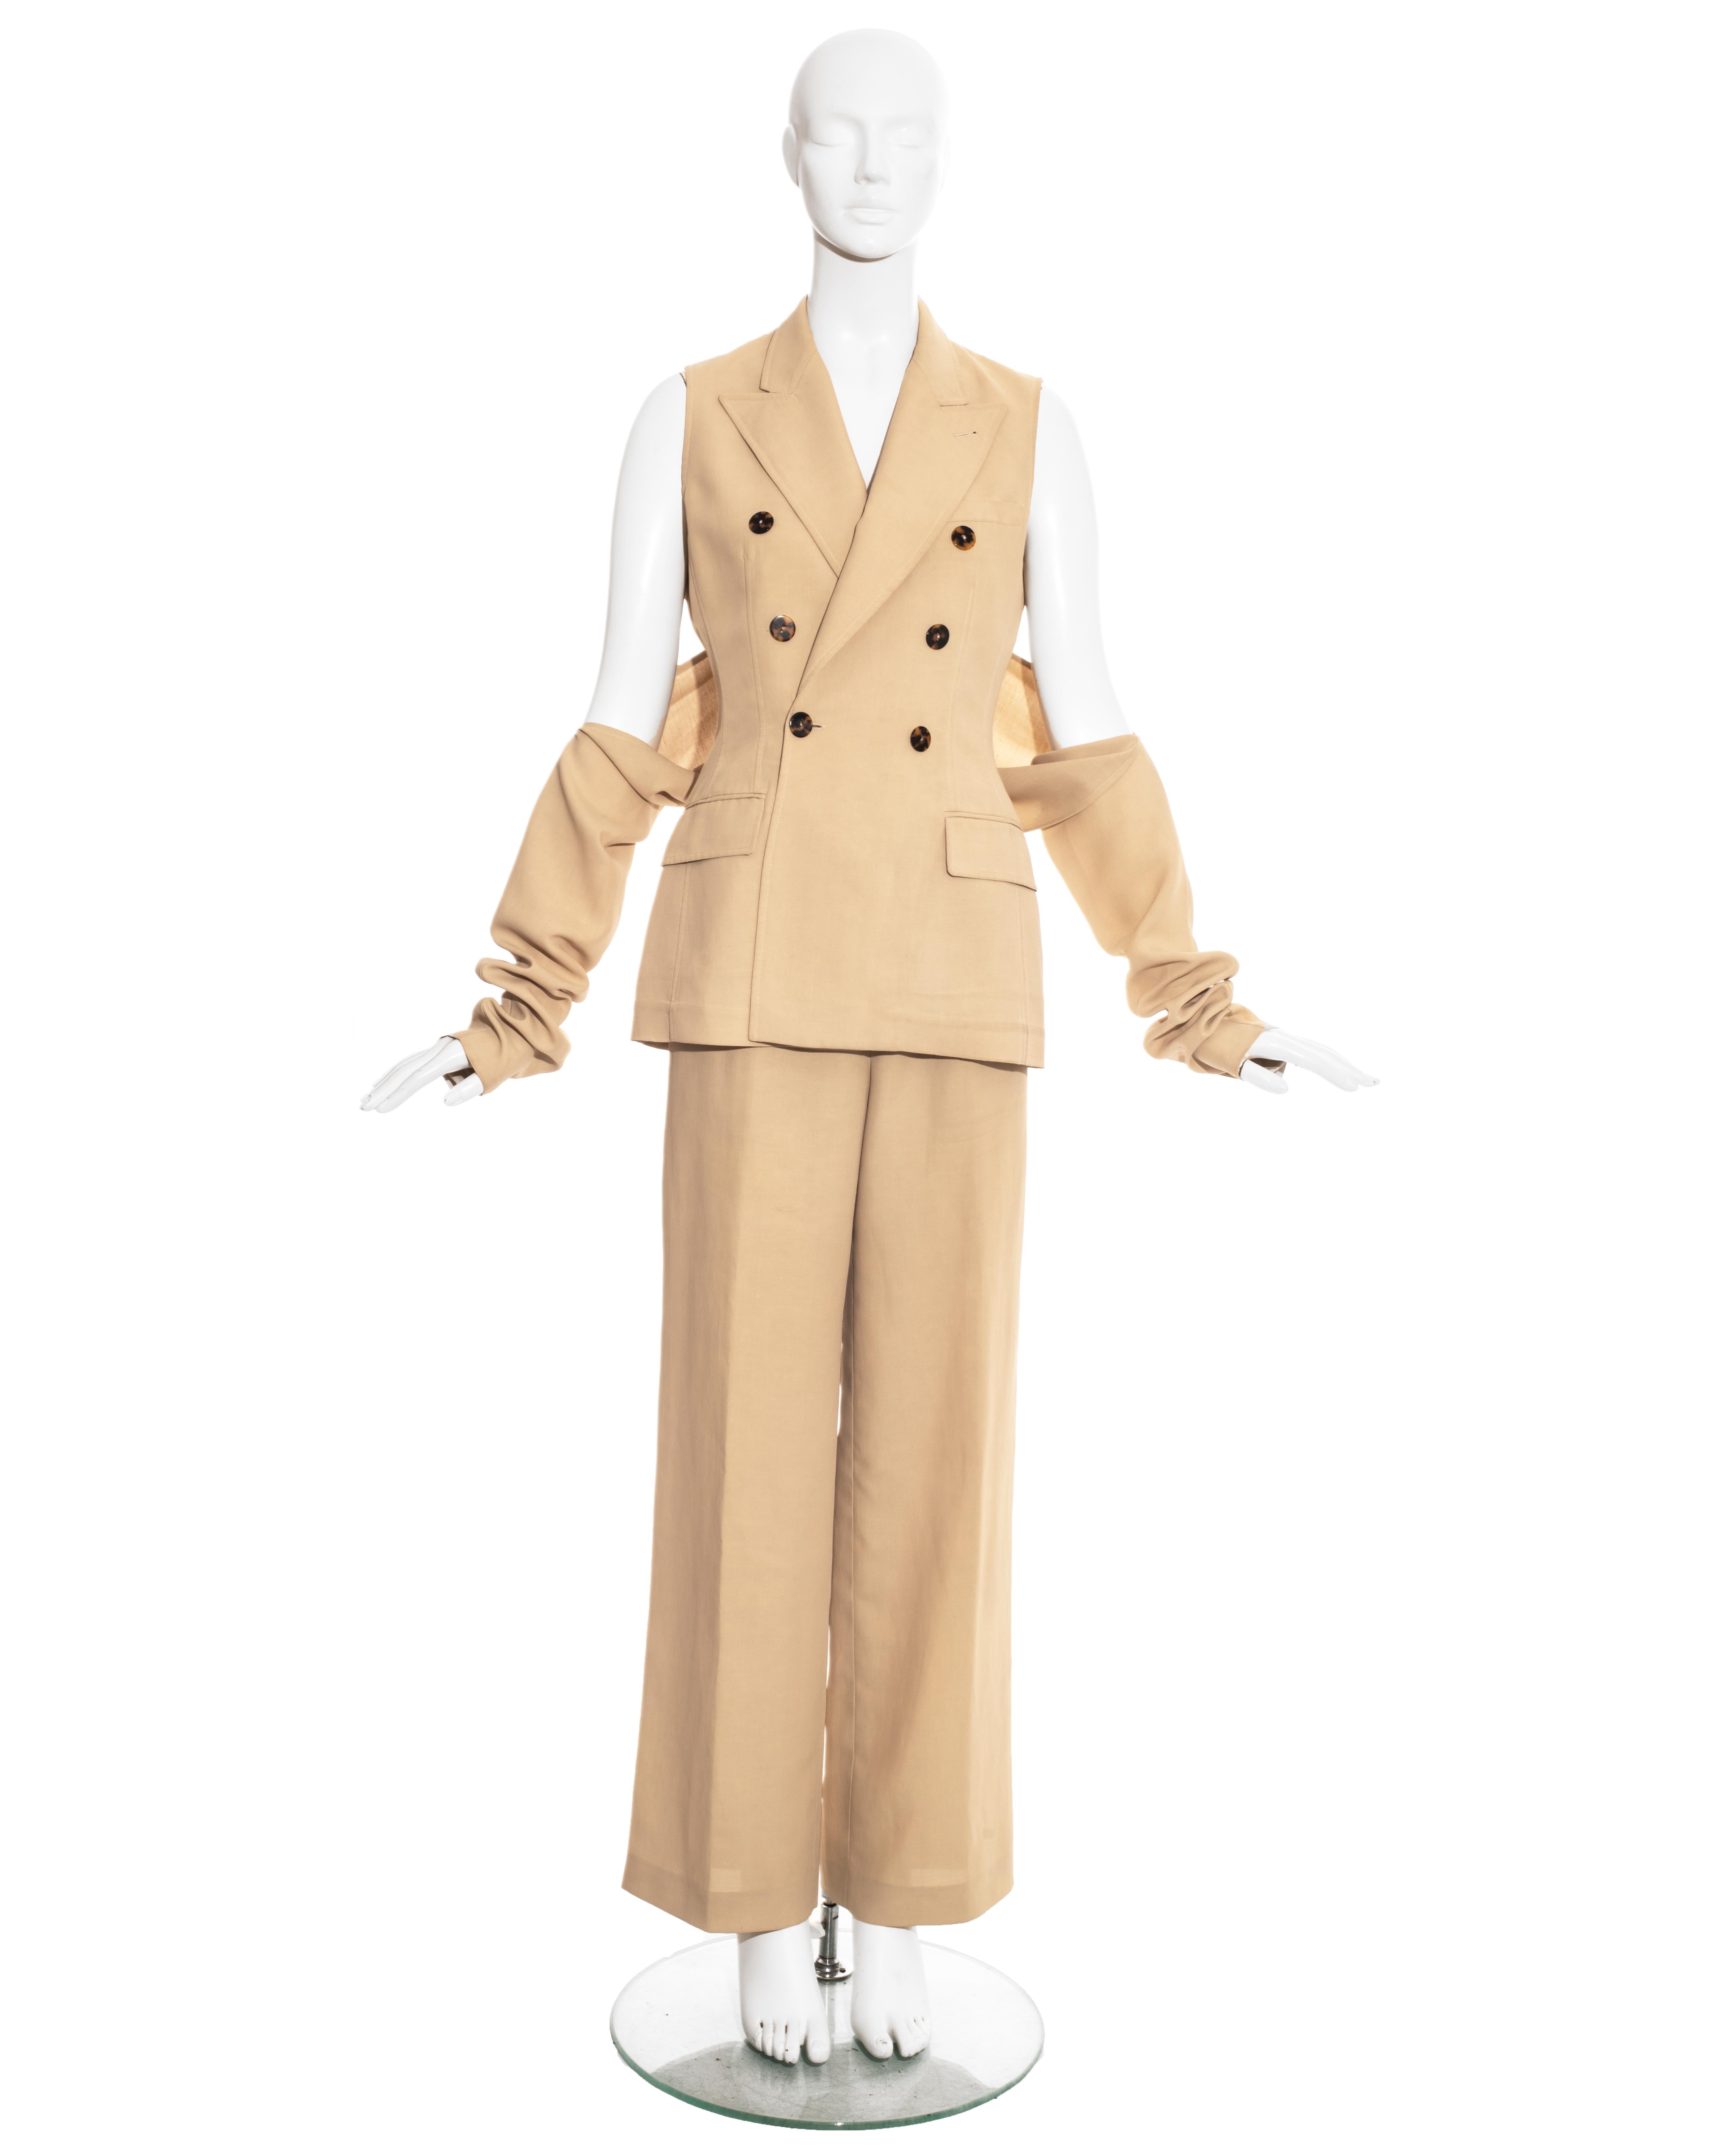 Jean Paul Gaultier cream linen three piece pant suit comprising: double breasted blazer jacket, bolero sleeve-jacket attaches with a button of the jacket, and wide leg pants.

Spring-Summer 1997